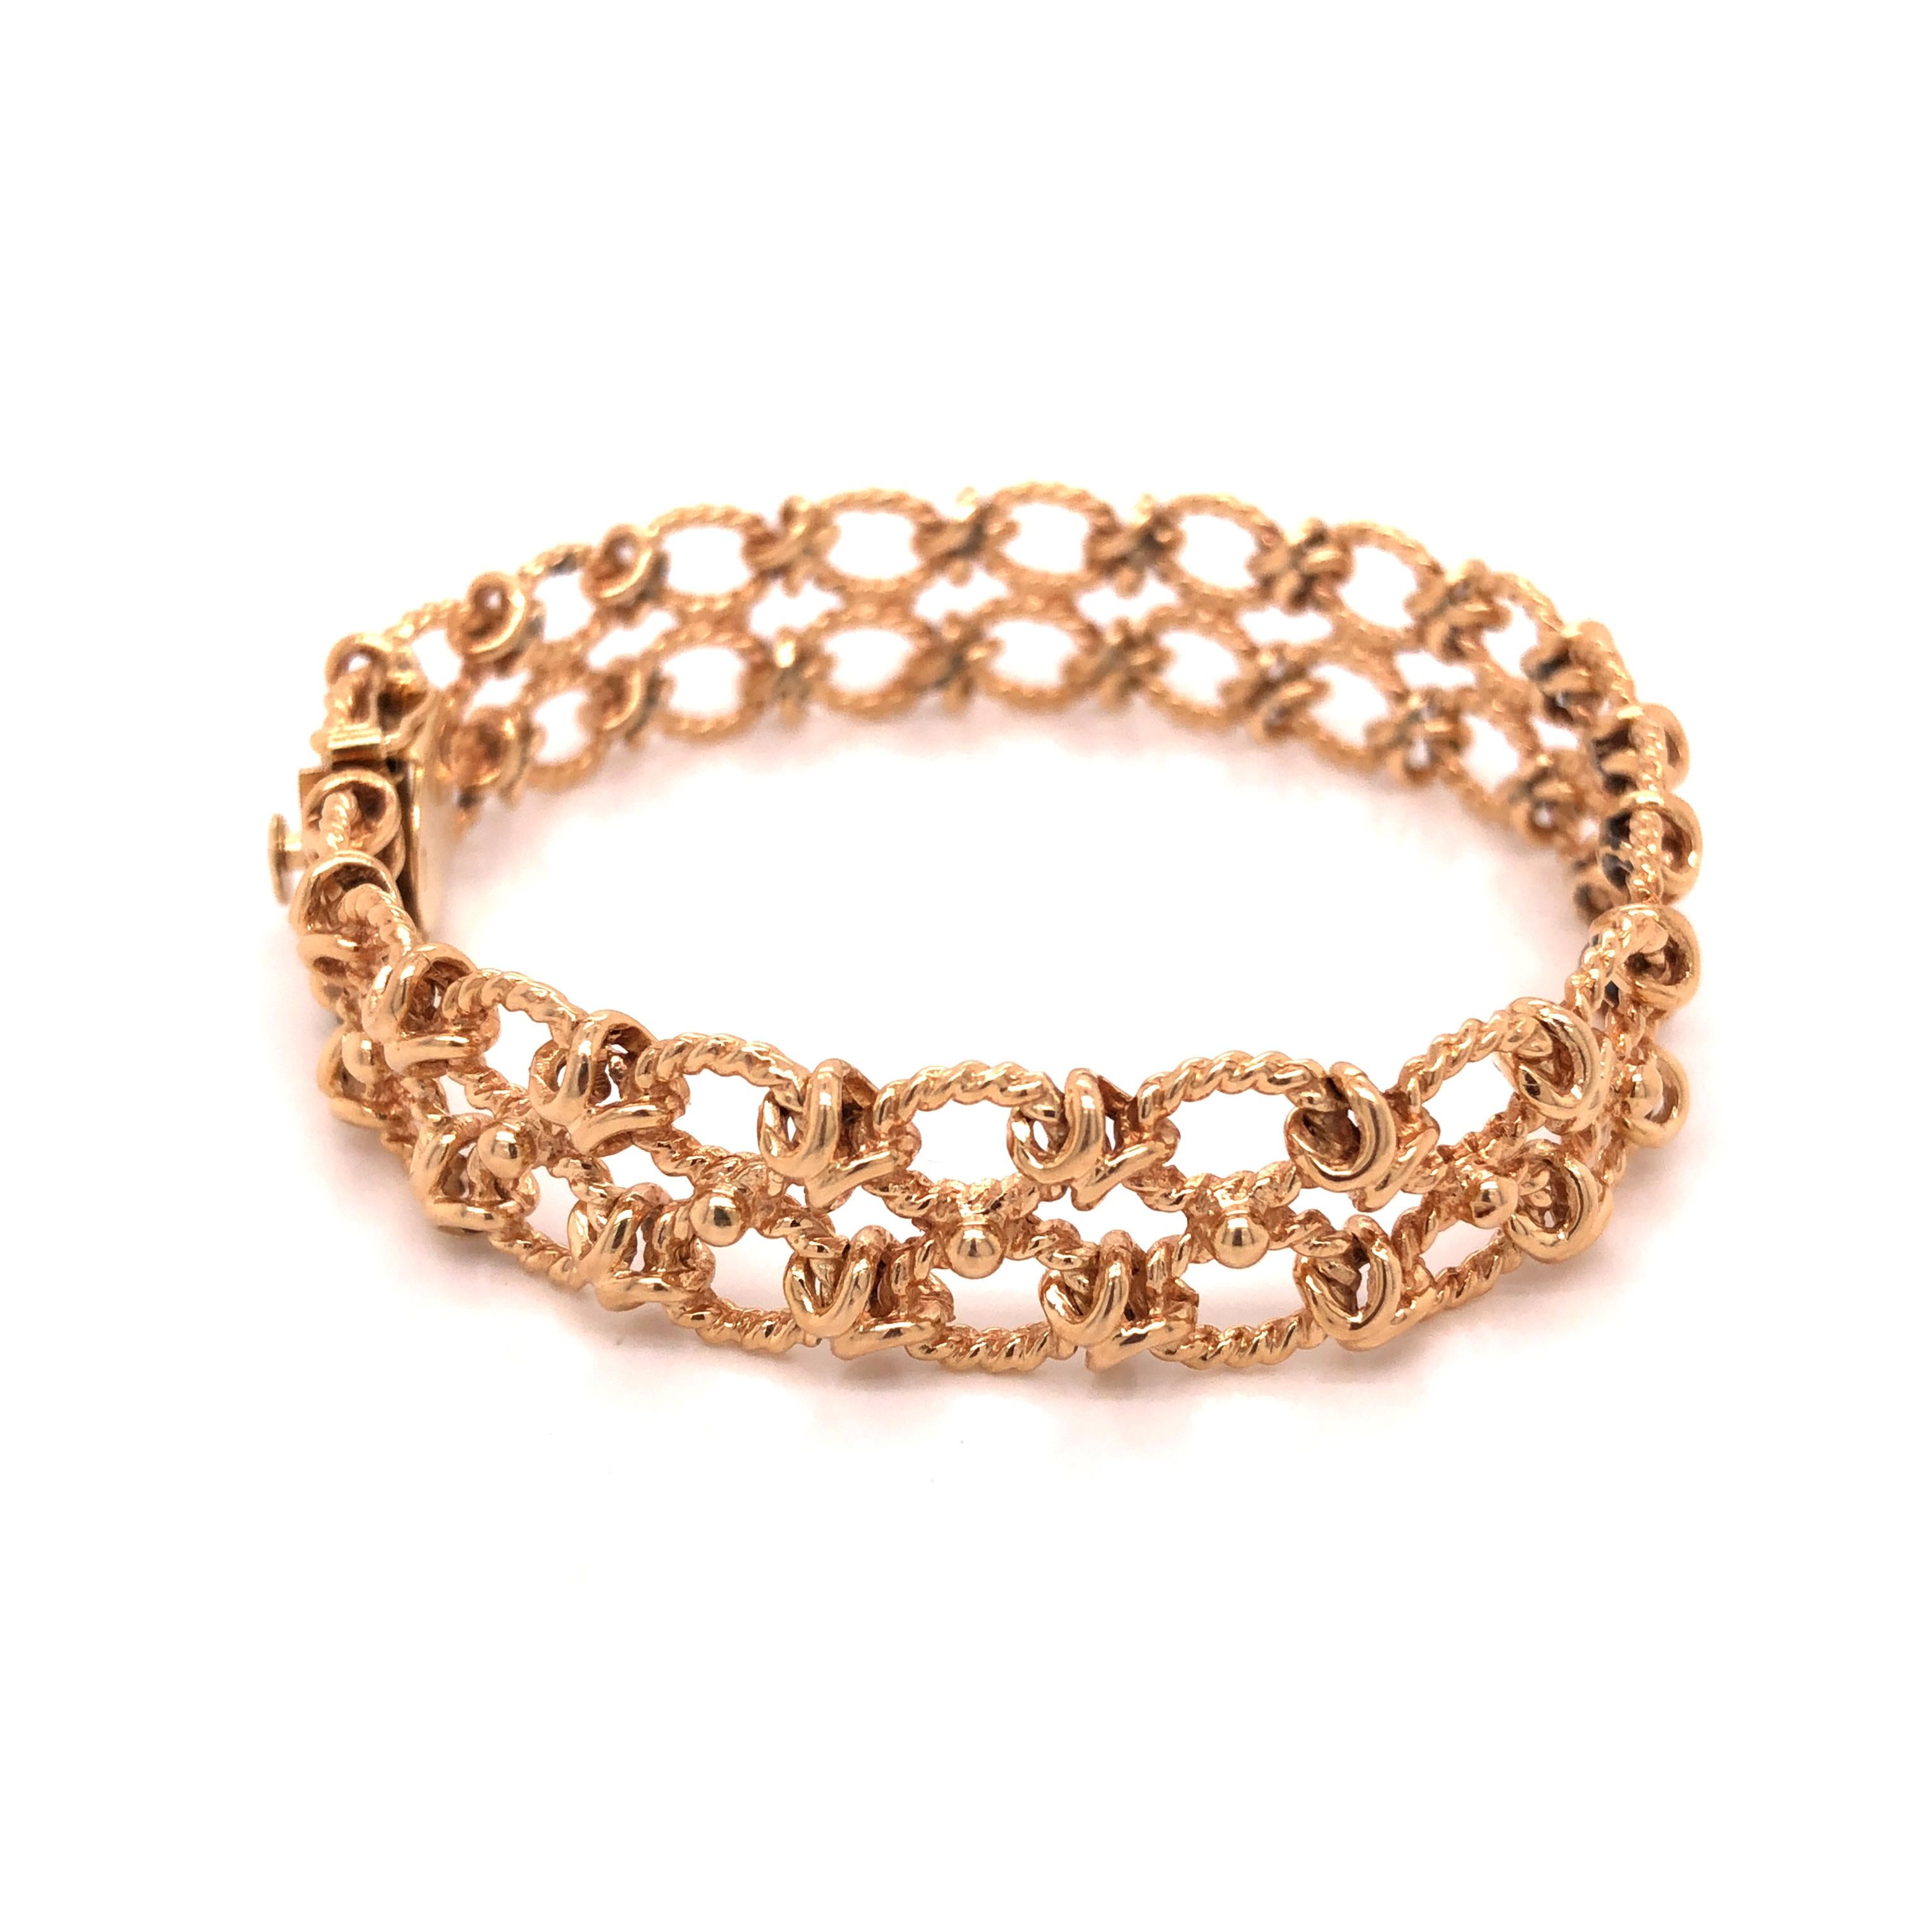 14K Yellow Gold Double Oval Ropetwist Link Bracelet

Metal: 14K Yellow Gold

Size: 7 1/2